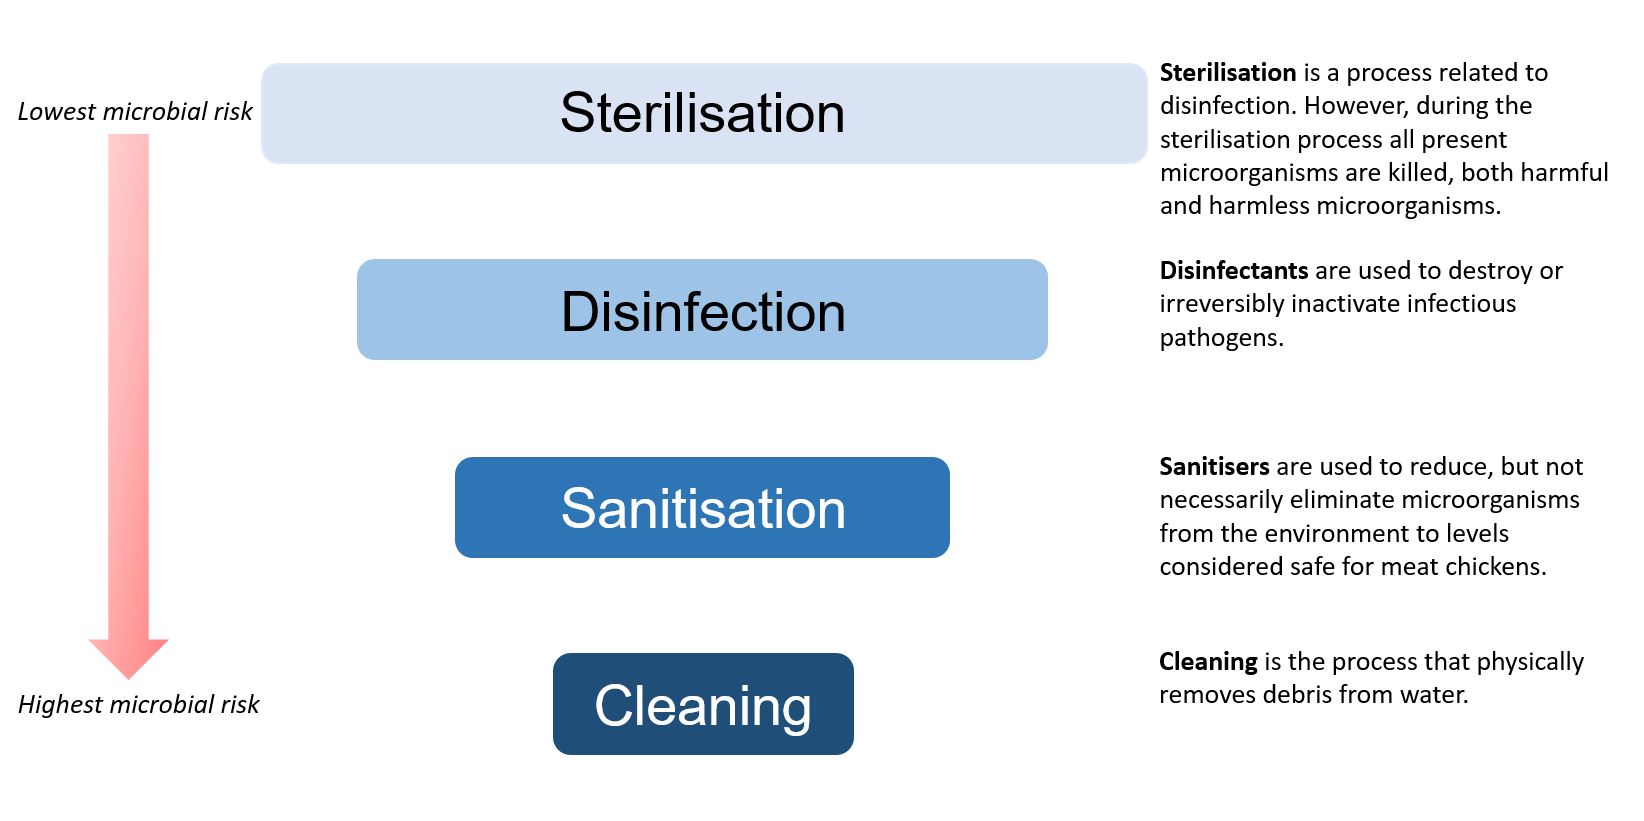 Graphic illustrating that sterilisation has the lowest microbial risk, down to cleaning which has the highest microbial risk.